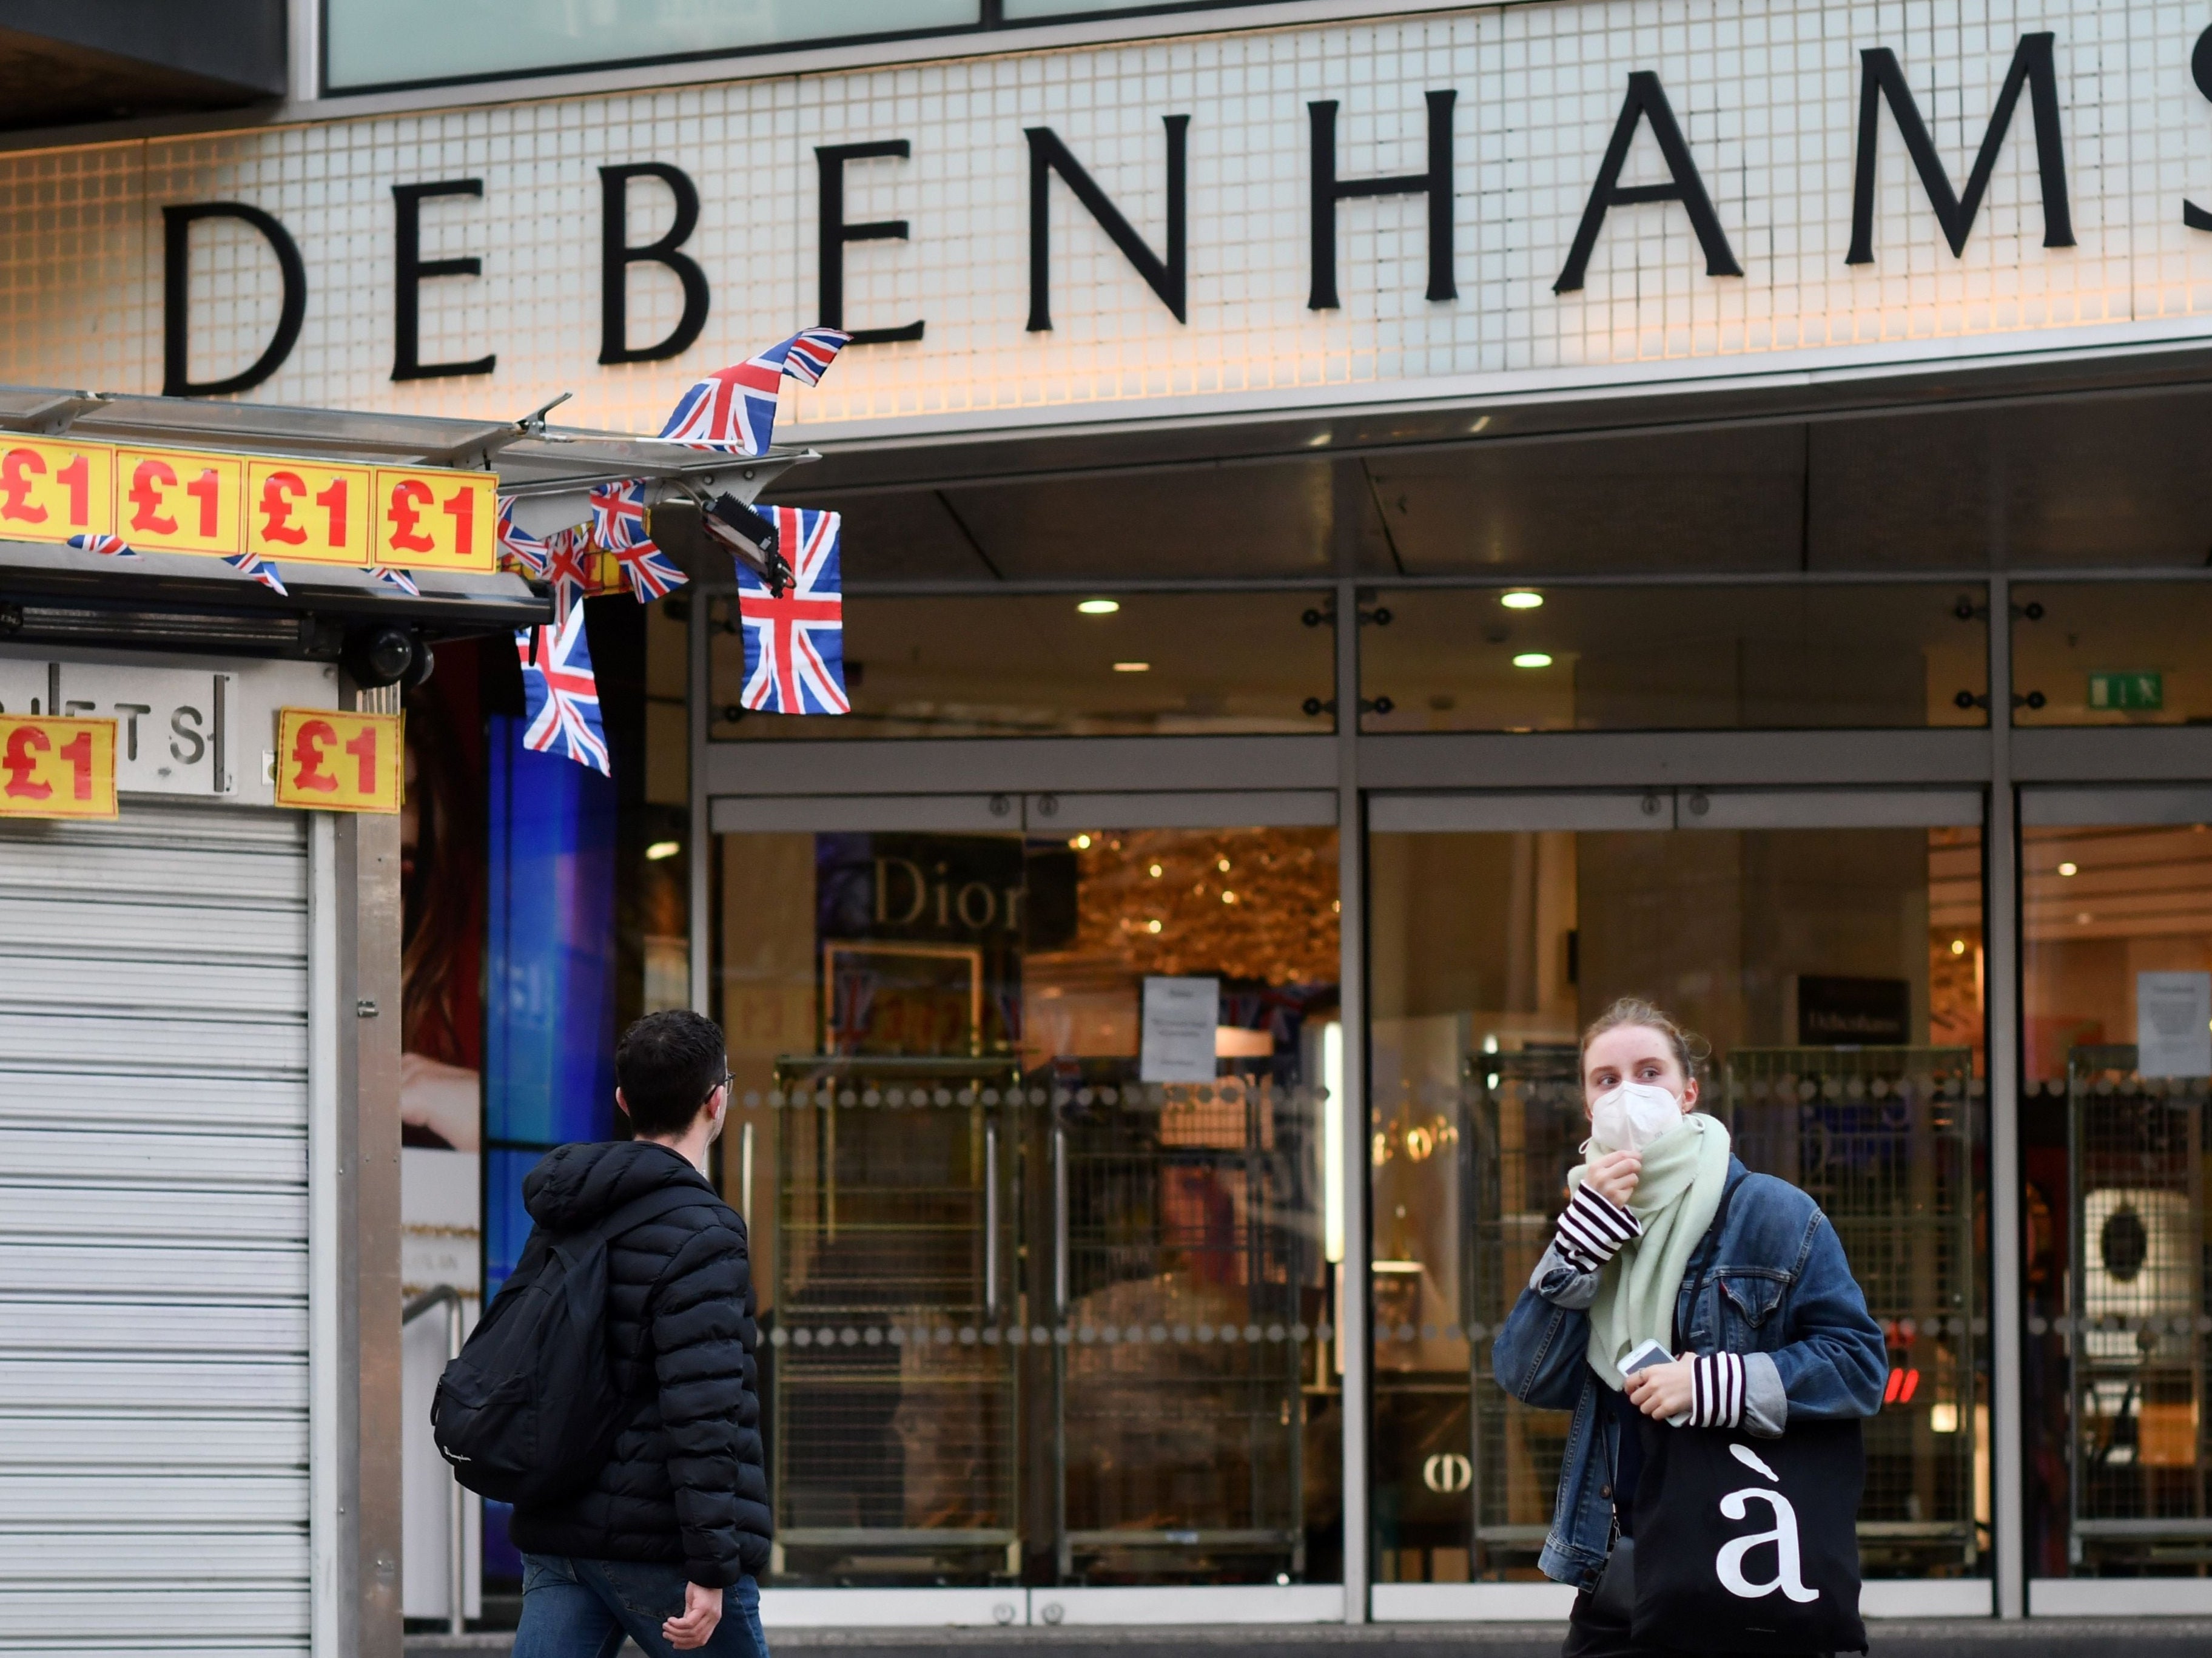 Debenhams stores are to close putting 12,000 jobs at risk